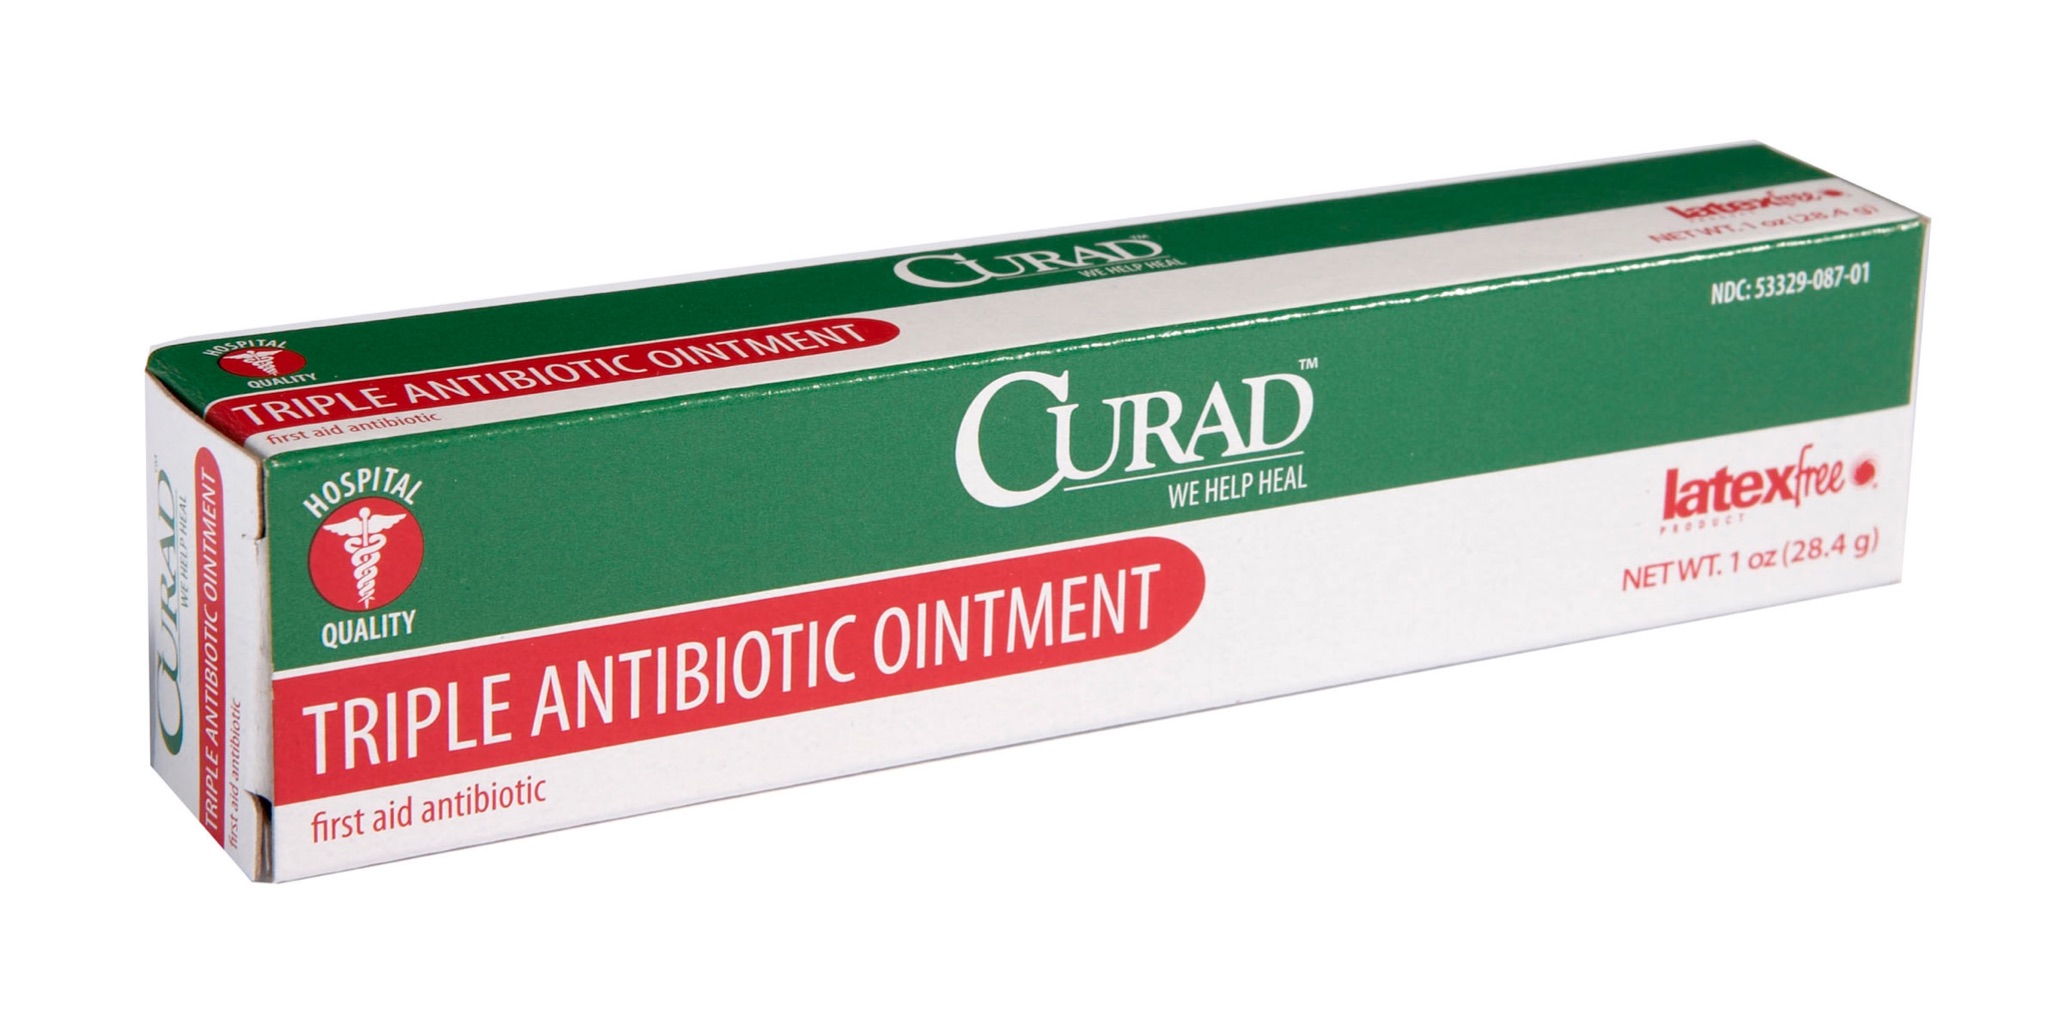 Cardboard box for tube of ointment